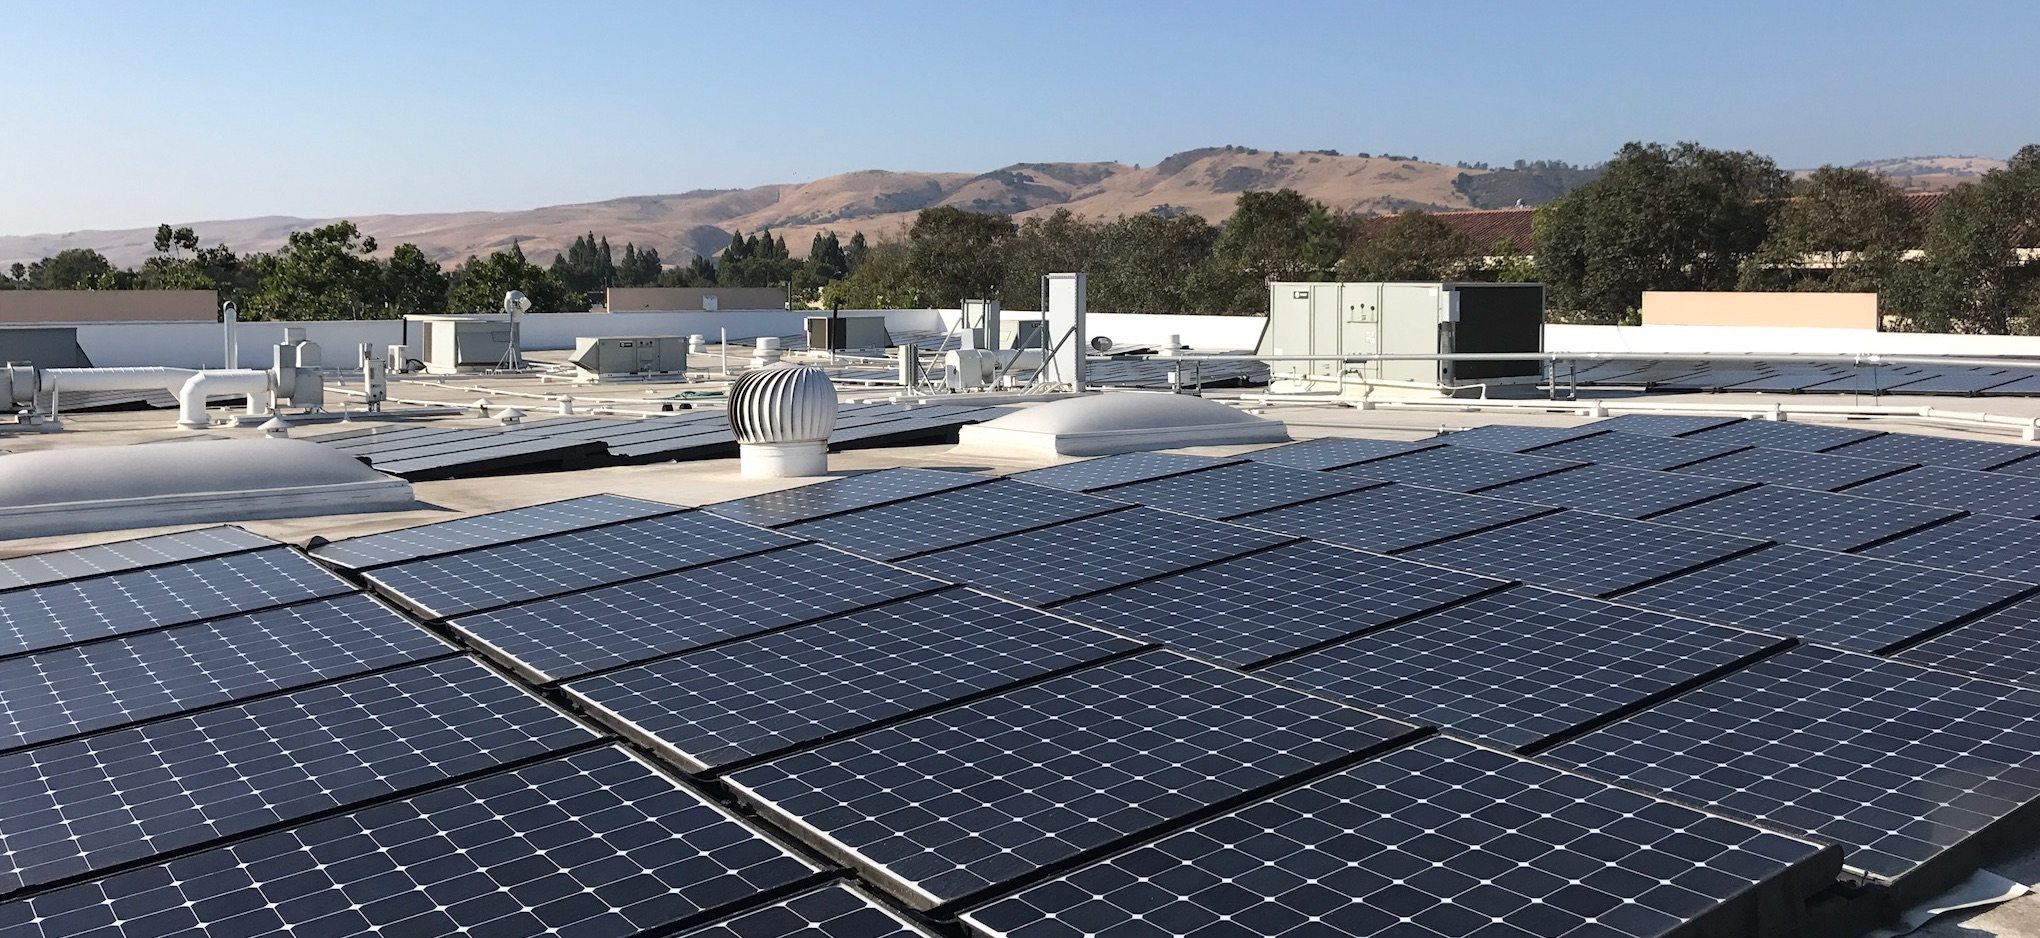 Looking across the roof of a commercial building with solar panels and trees and brown hills in the background.